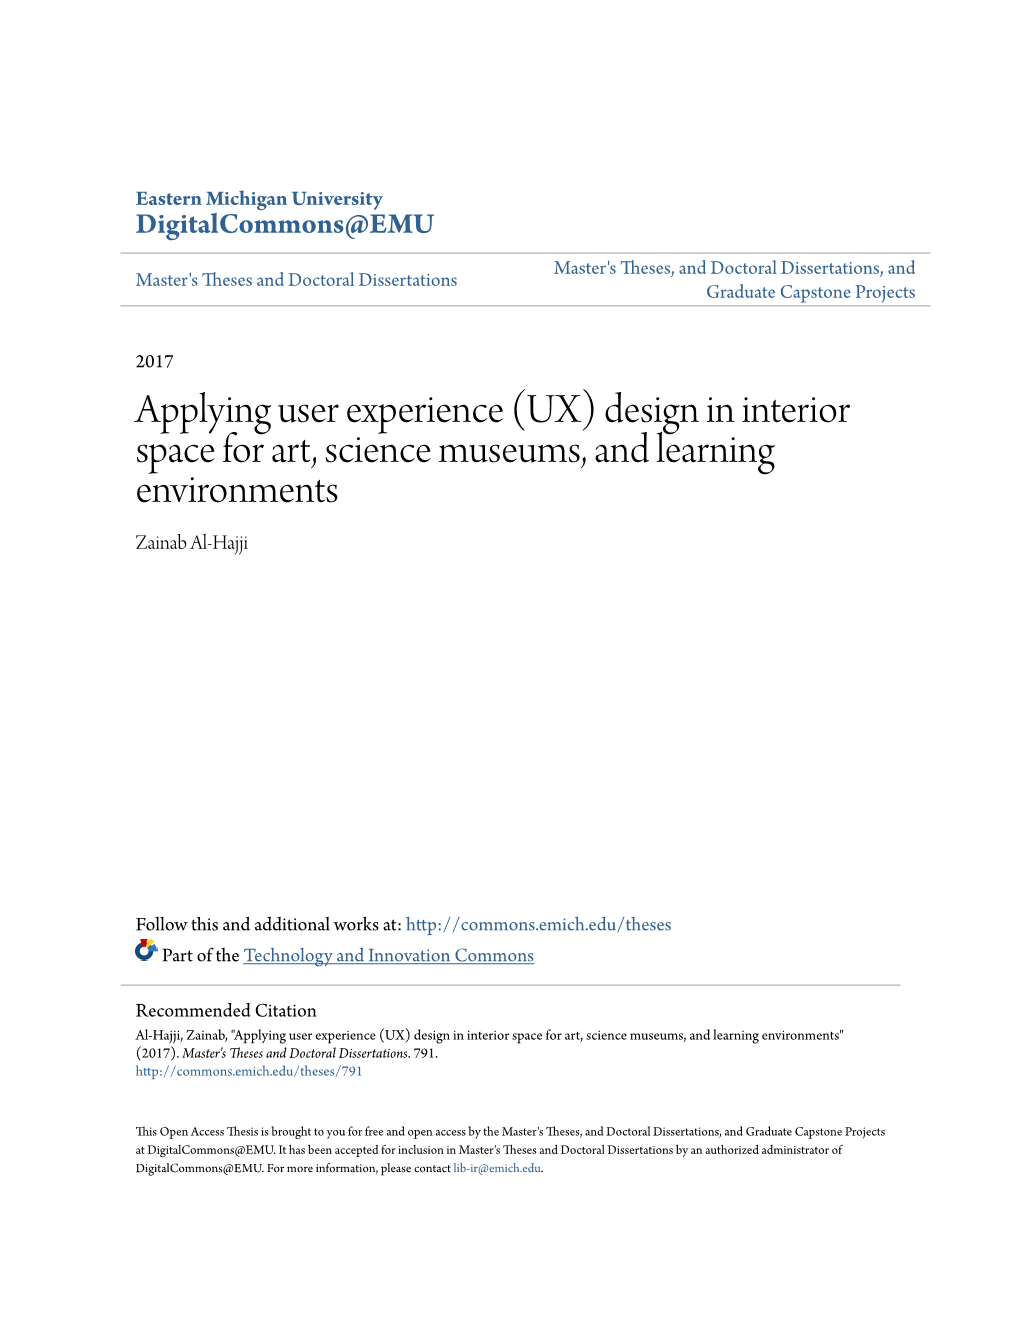 Applying User Experience (UX) Design in Interior Space for Art, Science Museums, and Learning Environments Zainab Al-Hajji